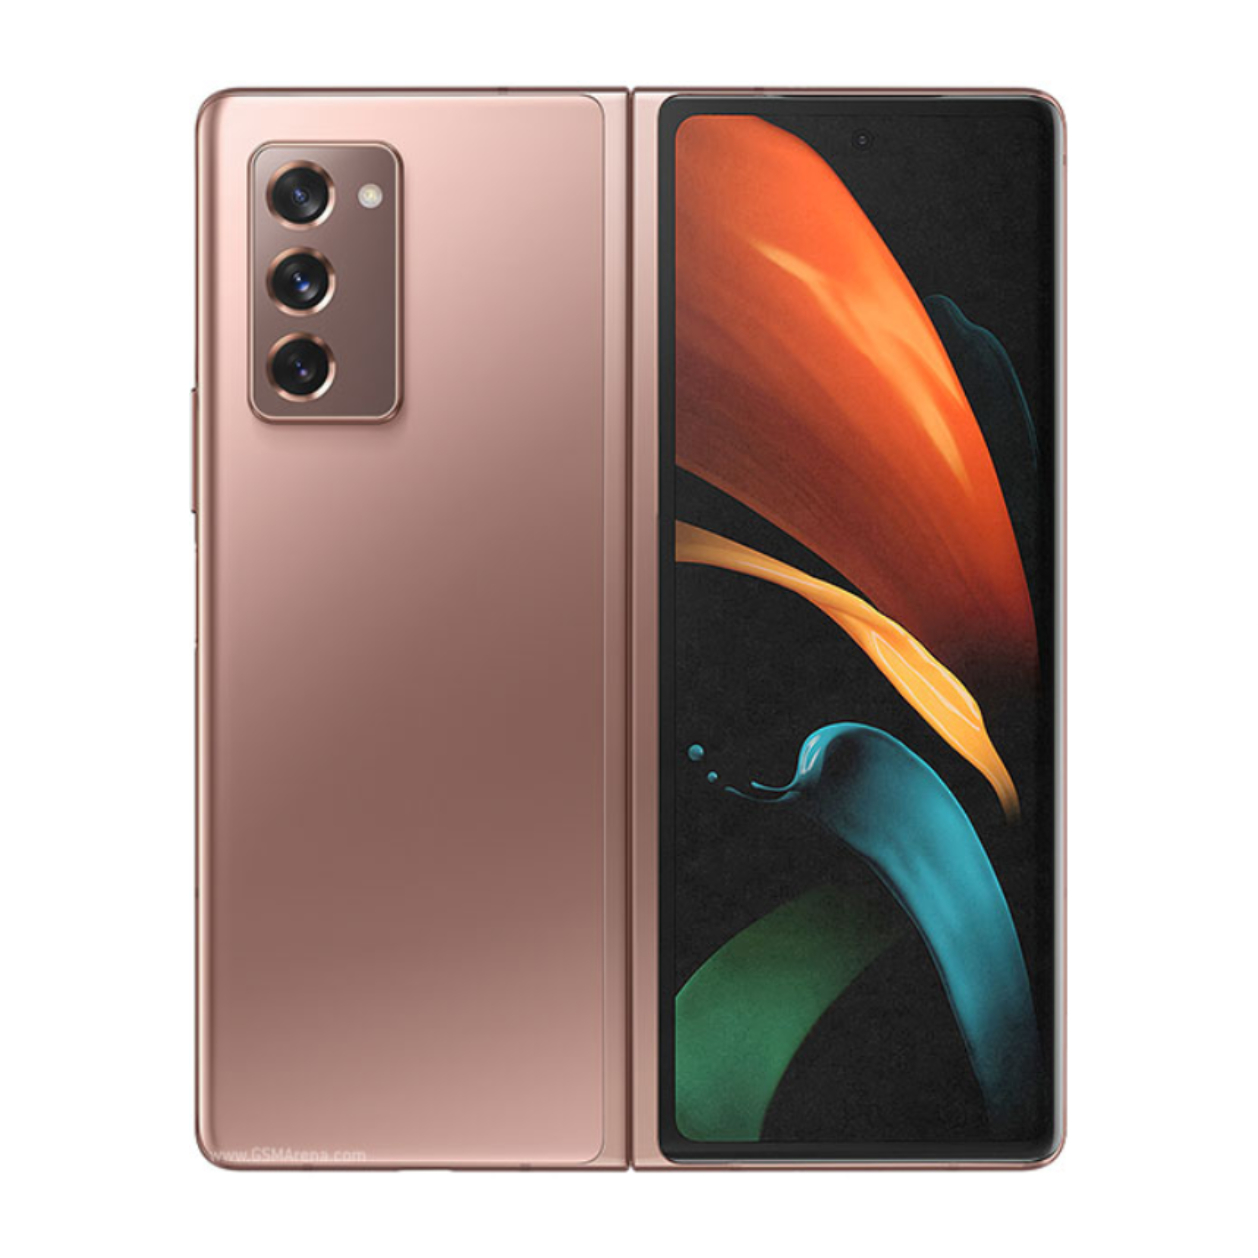 Samsung Galaxy Z Fold3 5G - Full Specifications - Gadgets Realm